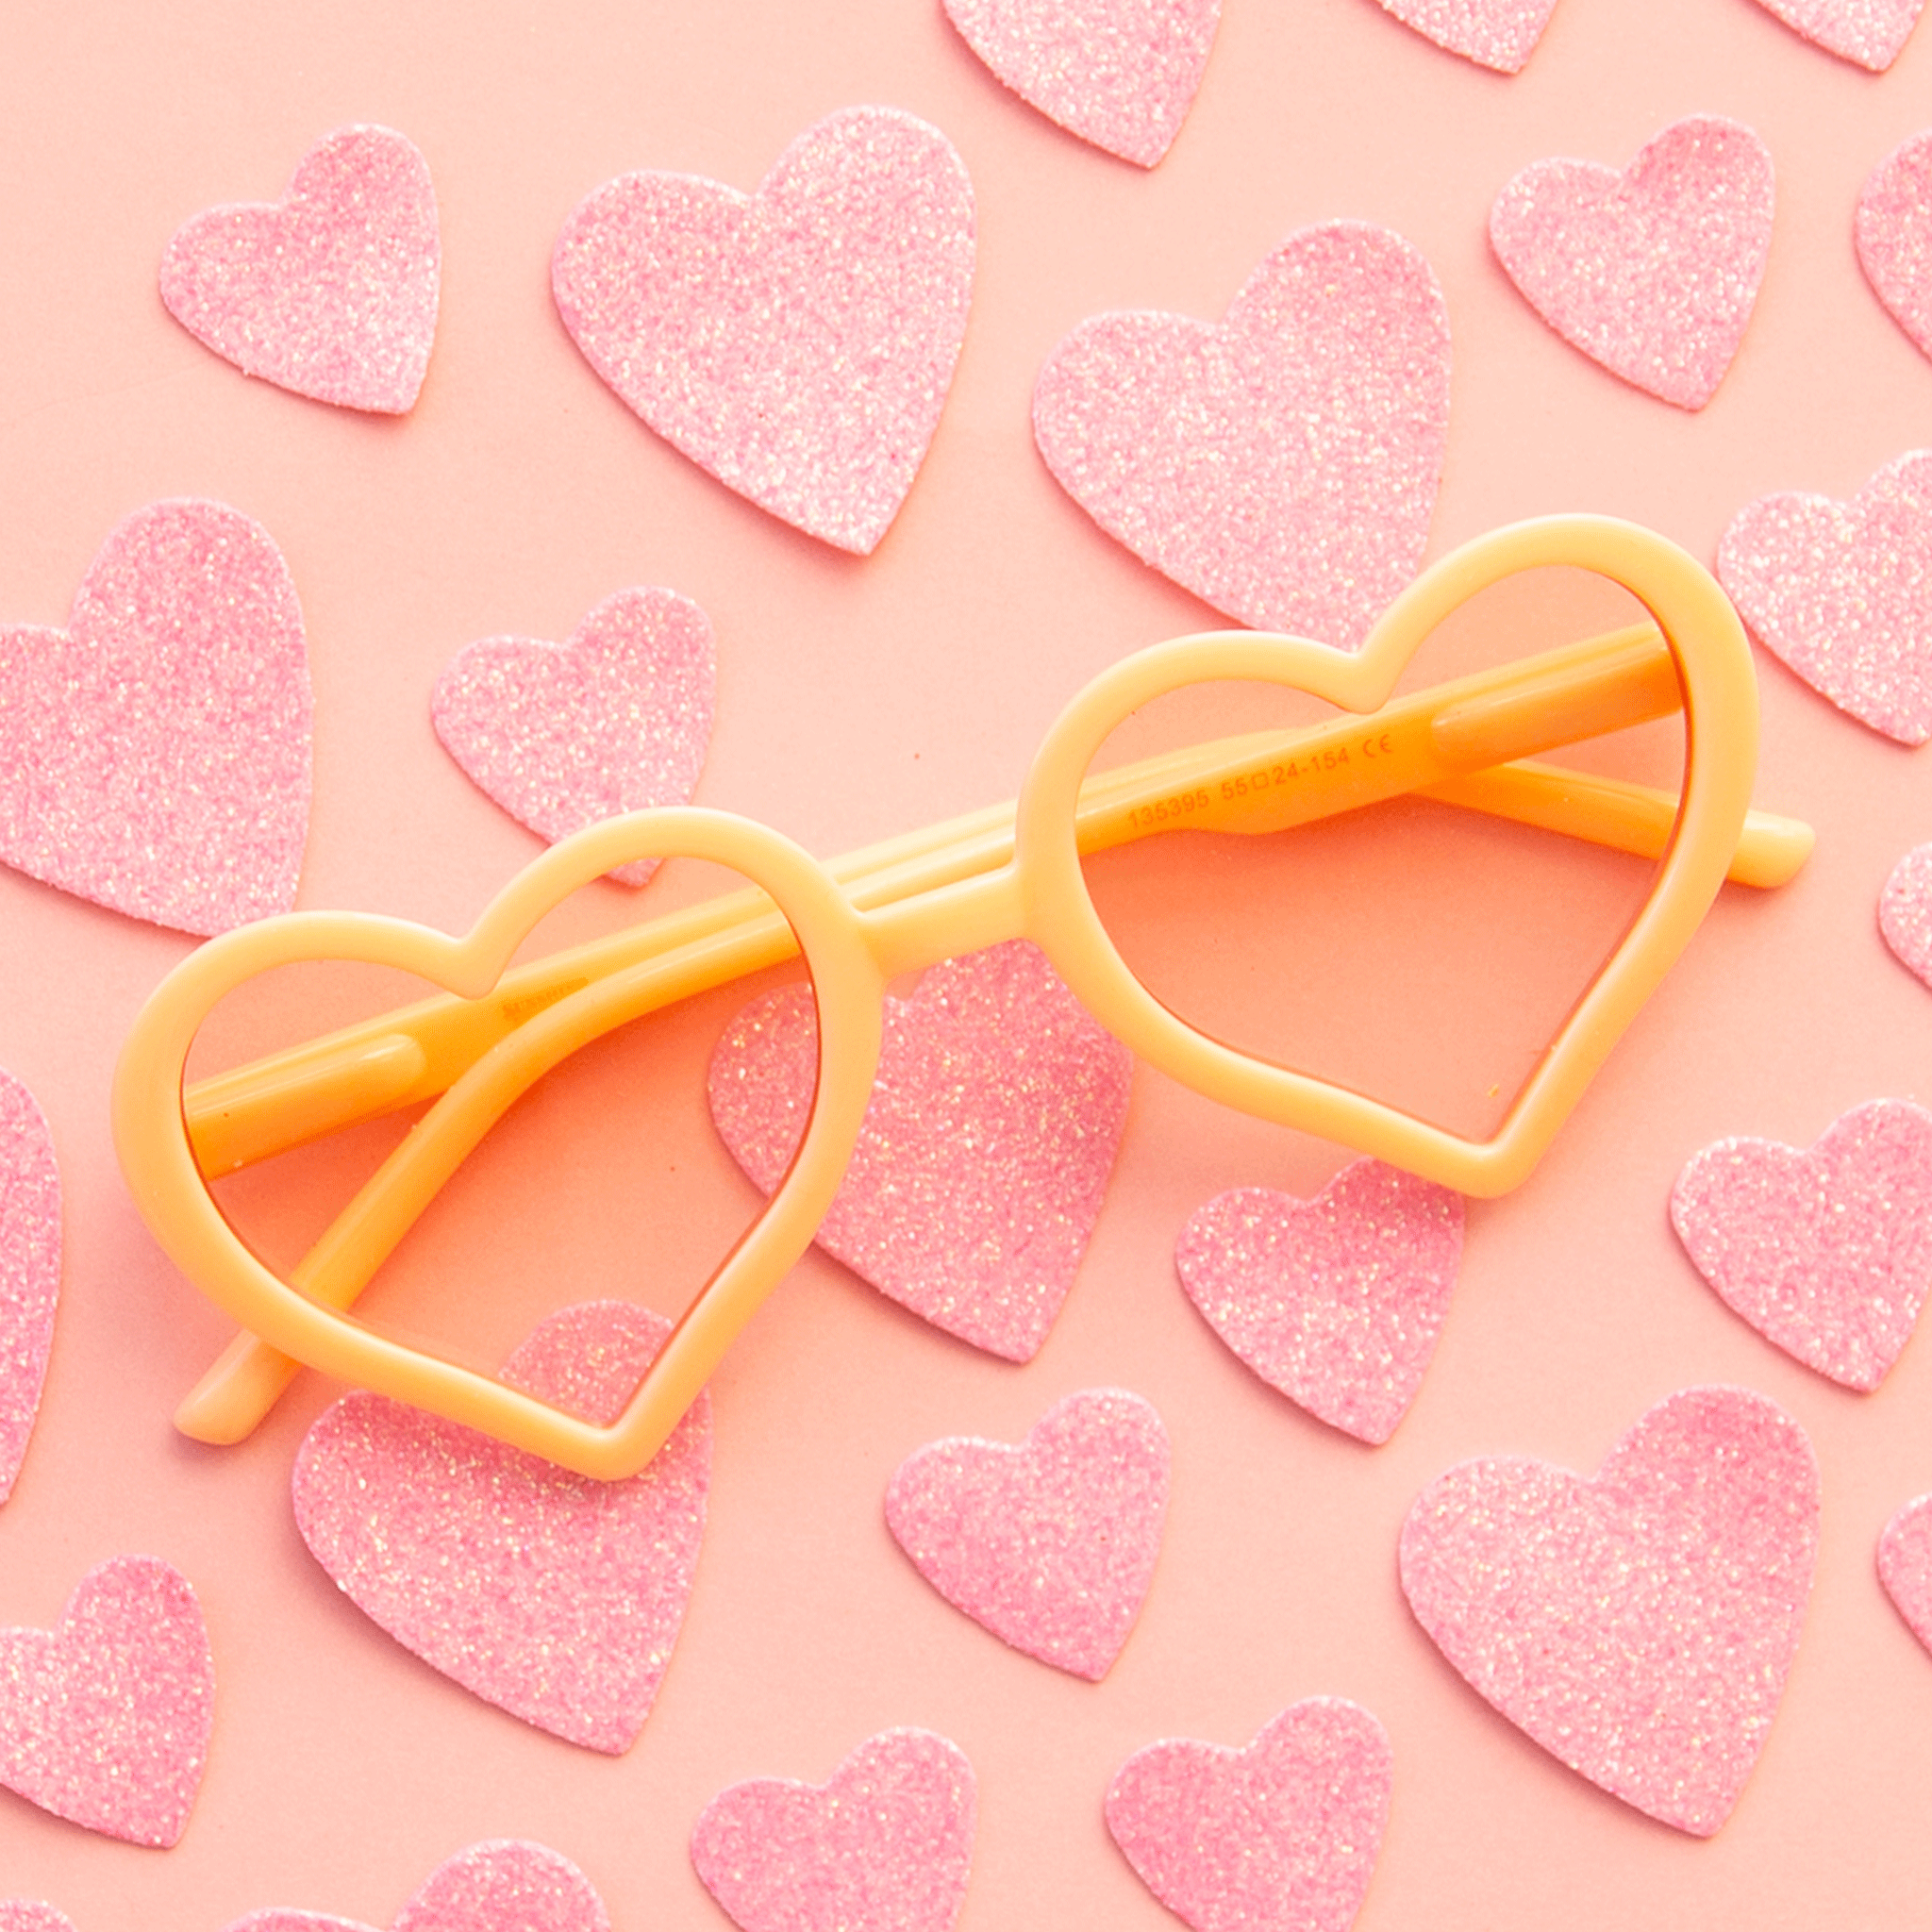 On a pink background with pink glitter hearts is a pair of apricot colored heart shaped sunglasses. 